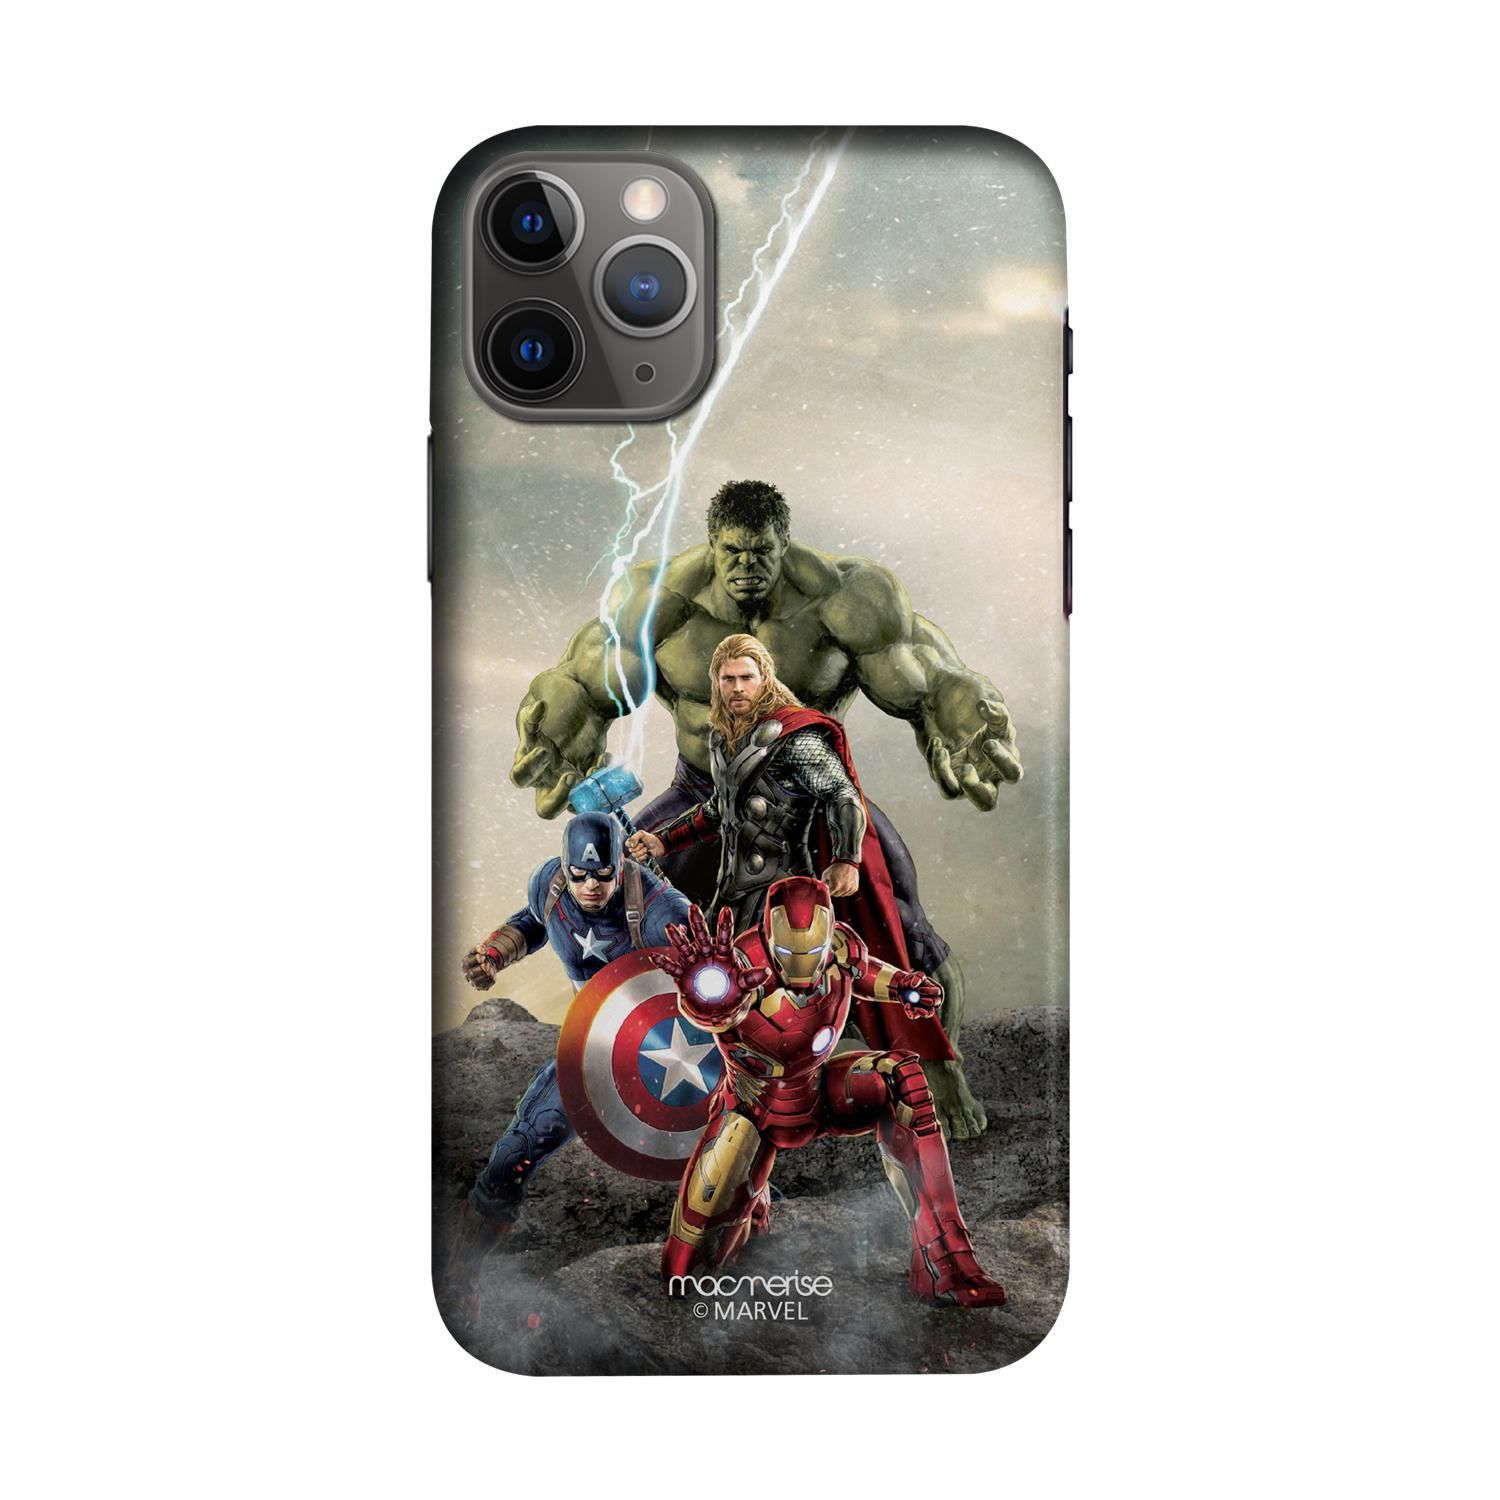 Time to Avenge - Sleek Phone Case for iPhone 11 Pro Max